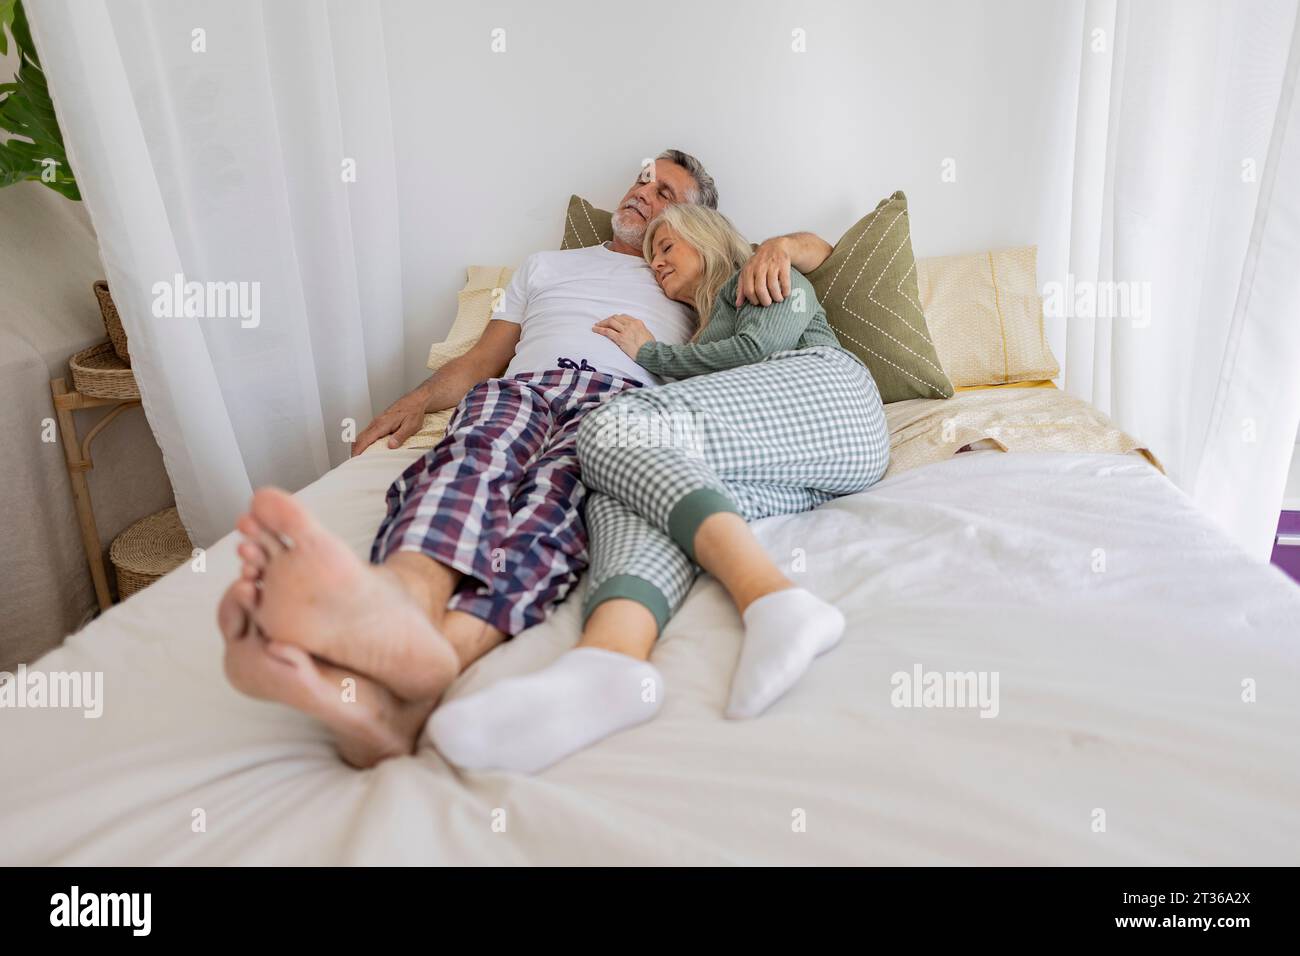 Mature couple relaxing together on bed at home Stock Photo